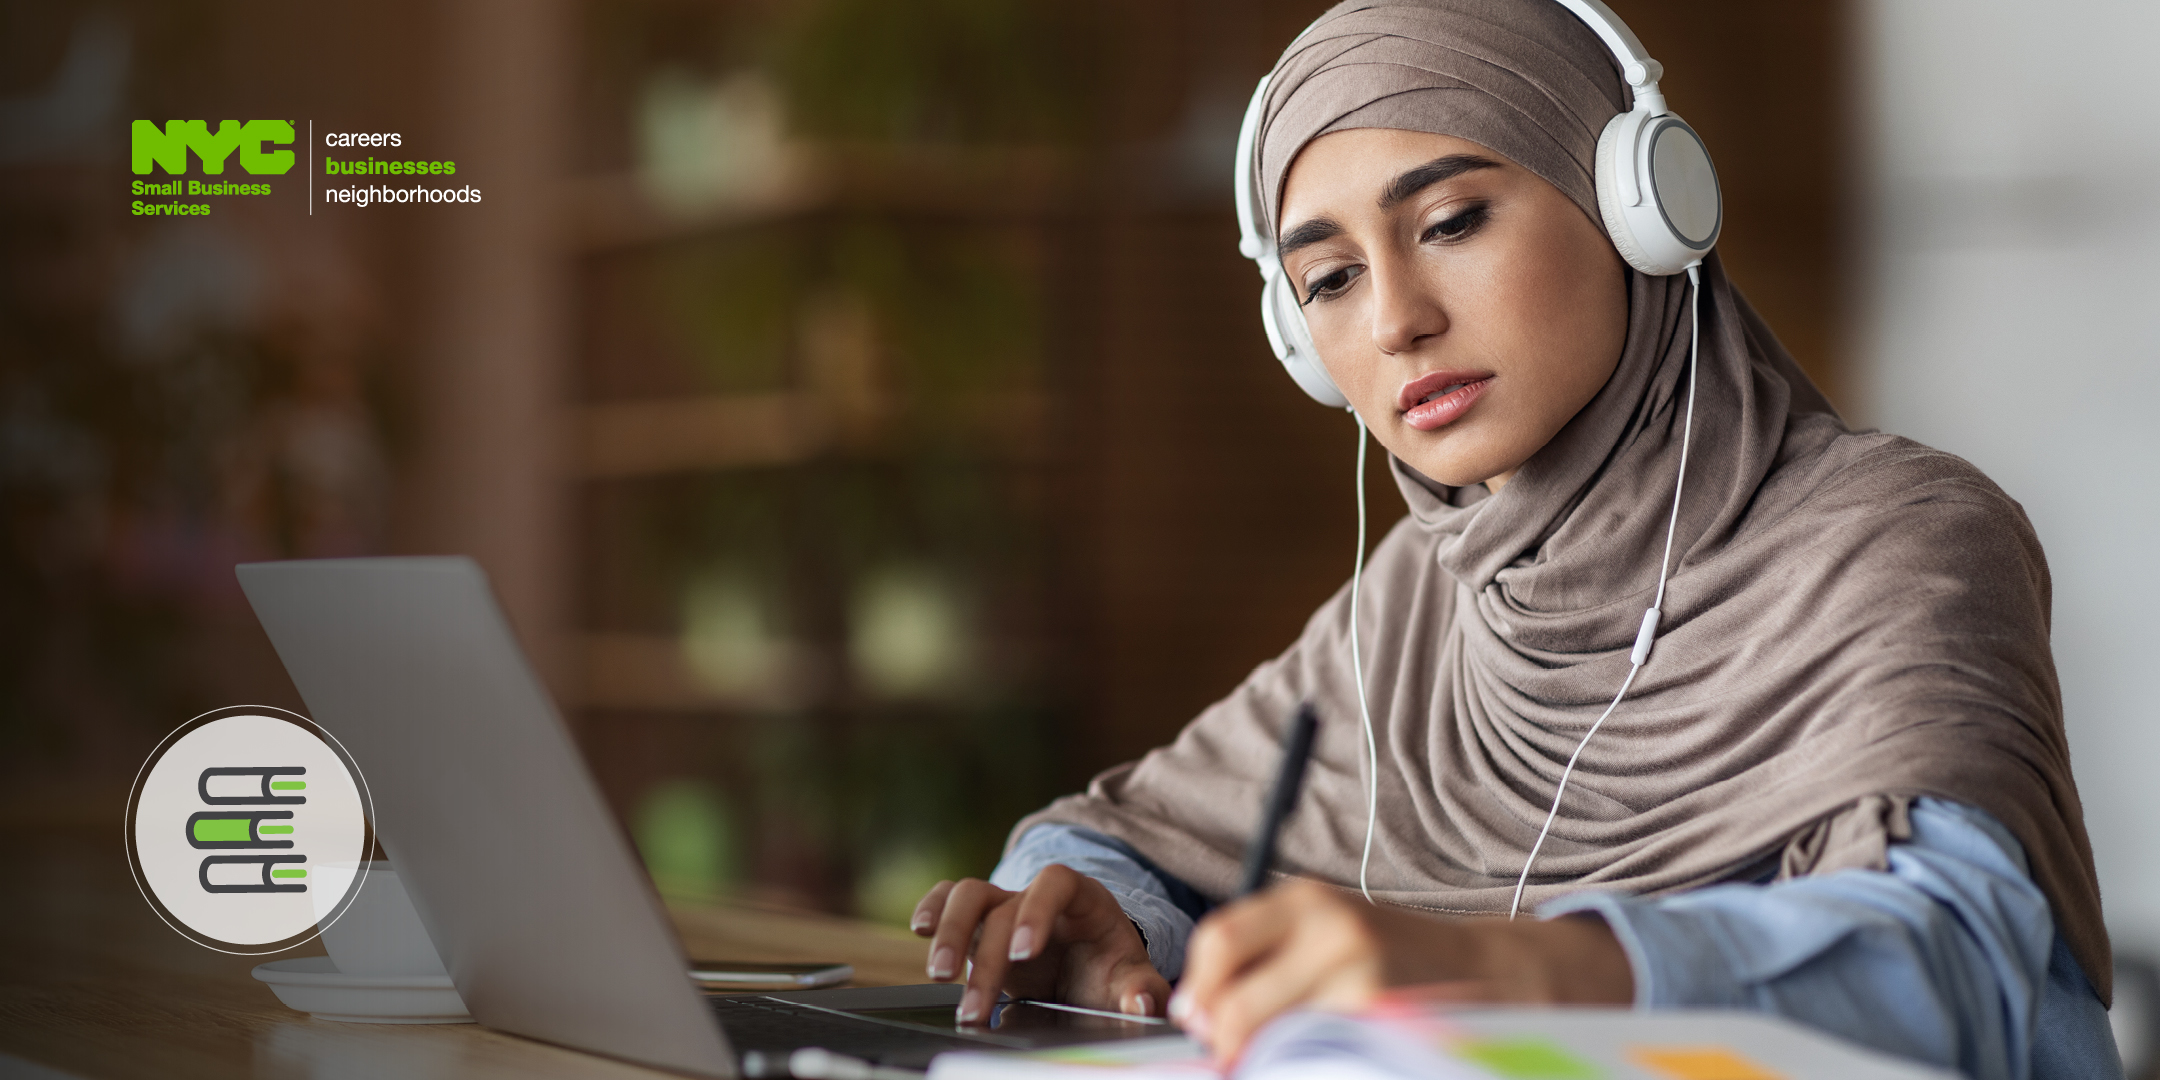 Graphic featuring a photo of an adult woman with headphones on taking notes while looking at a laptop screen with SBS logo and icon of books